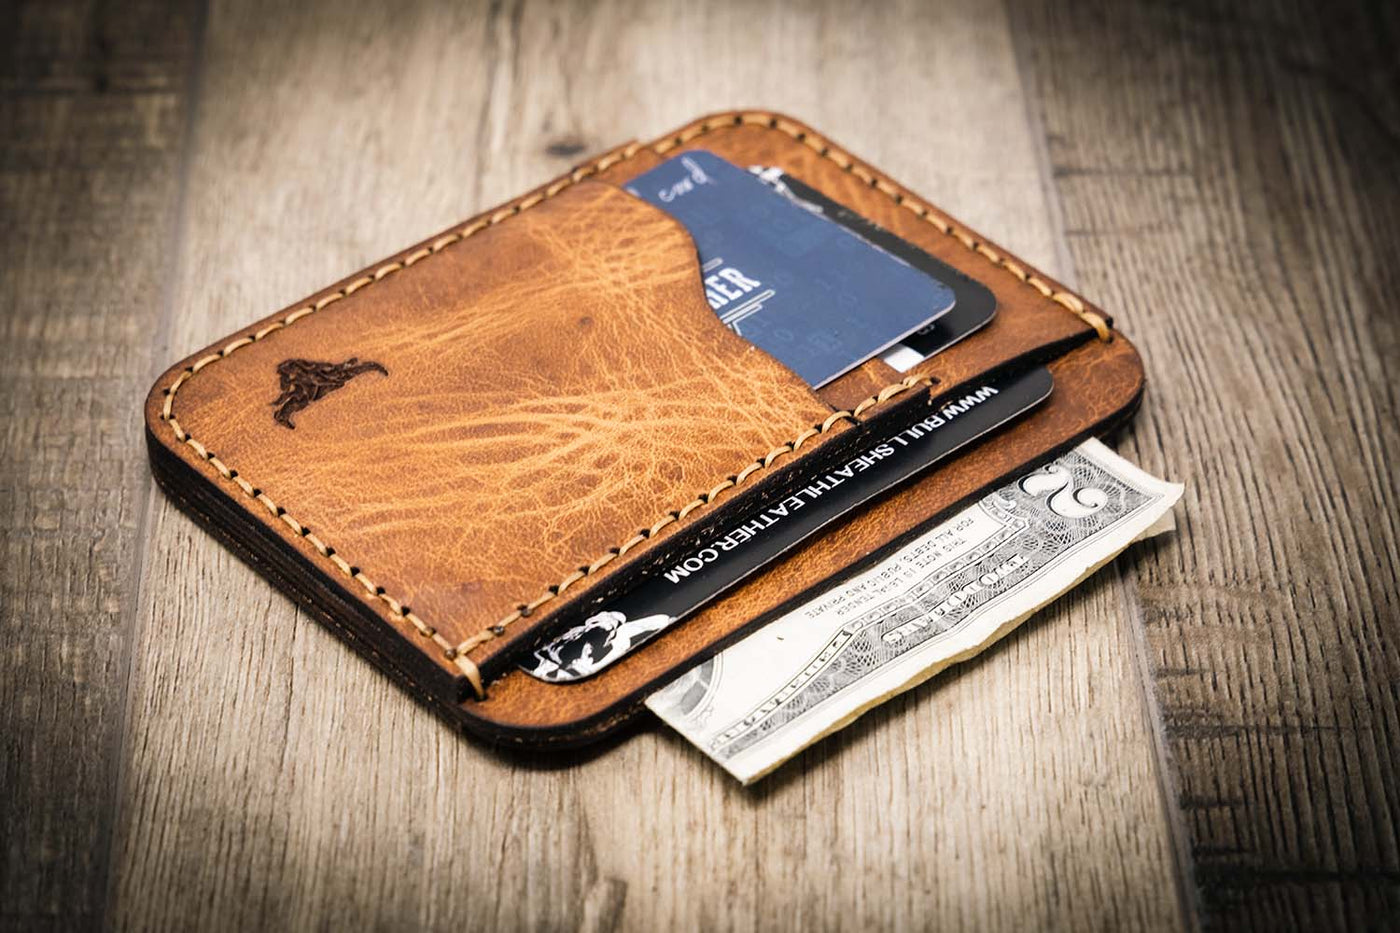 Contact’s Genuine Leather Mini Designer Casual Wallets for Men